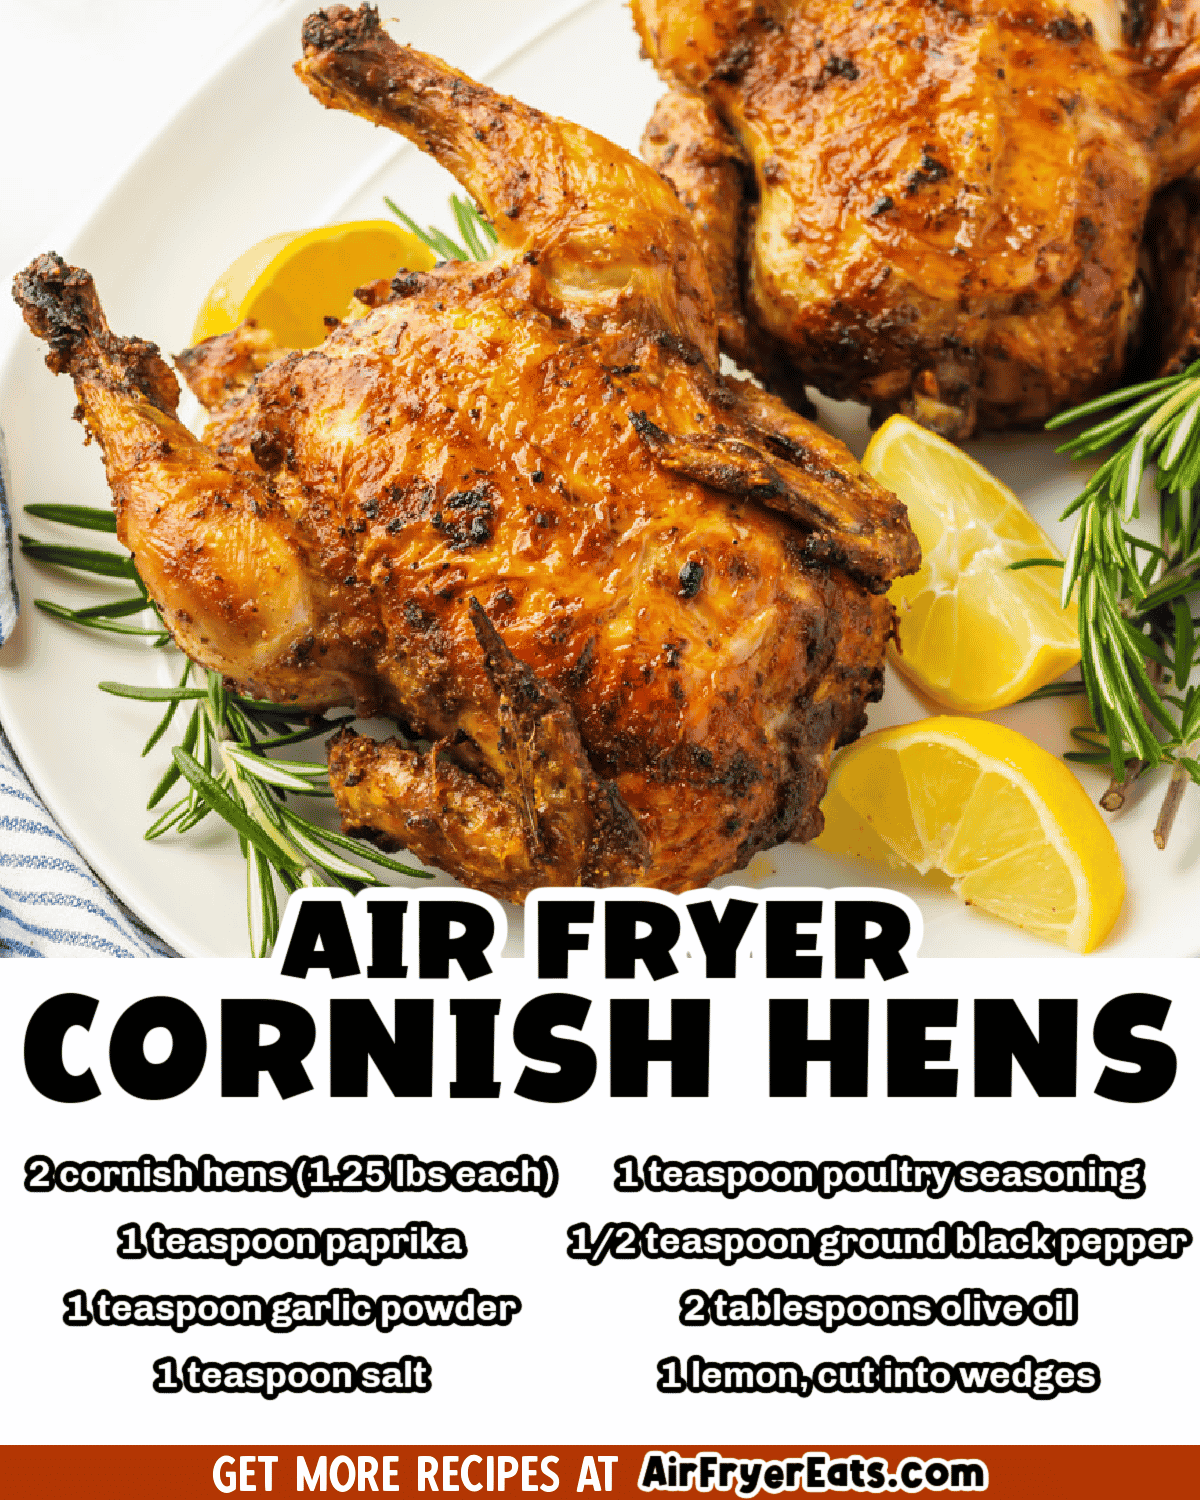 You can cook cornish hen in the air fryer! Your air fryer cornish hen will have crispy skin and the most tender, juicy meat, with very little fuss. via @vegetarianmamma